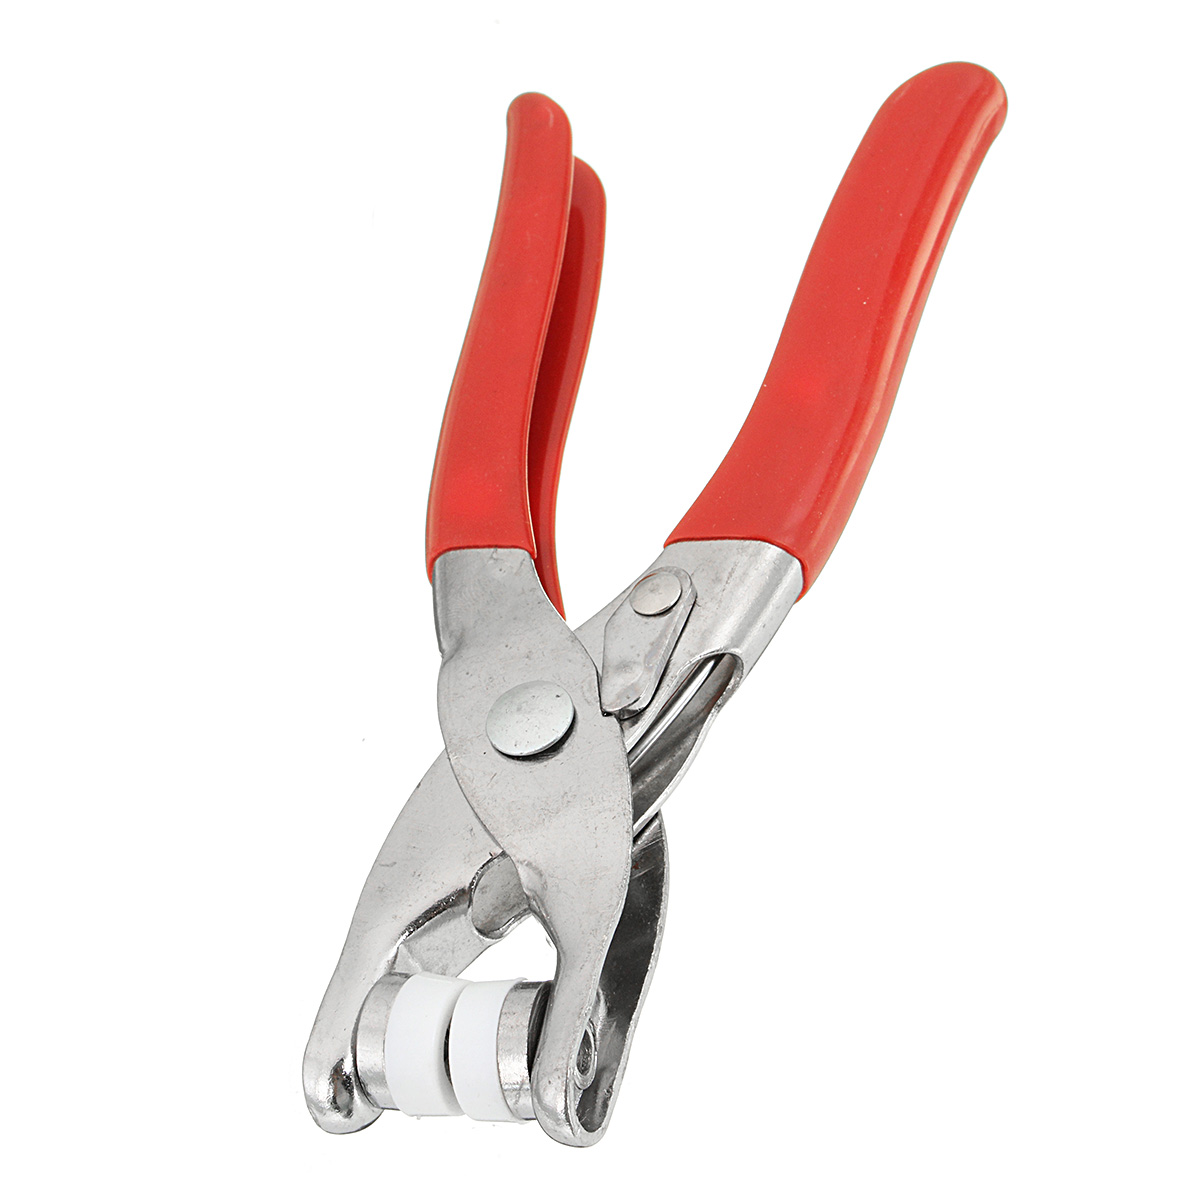 95mm-Prong-Ring-Press-Studs-Buttons-Fastener-Snap-Plier-Fixing-Tool-Craft-1093617